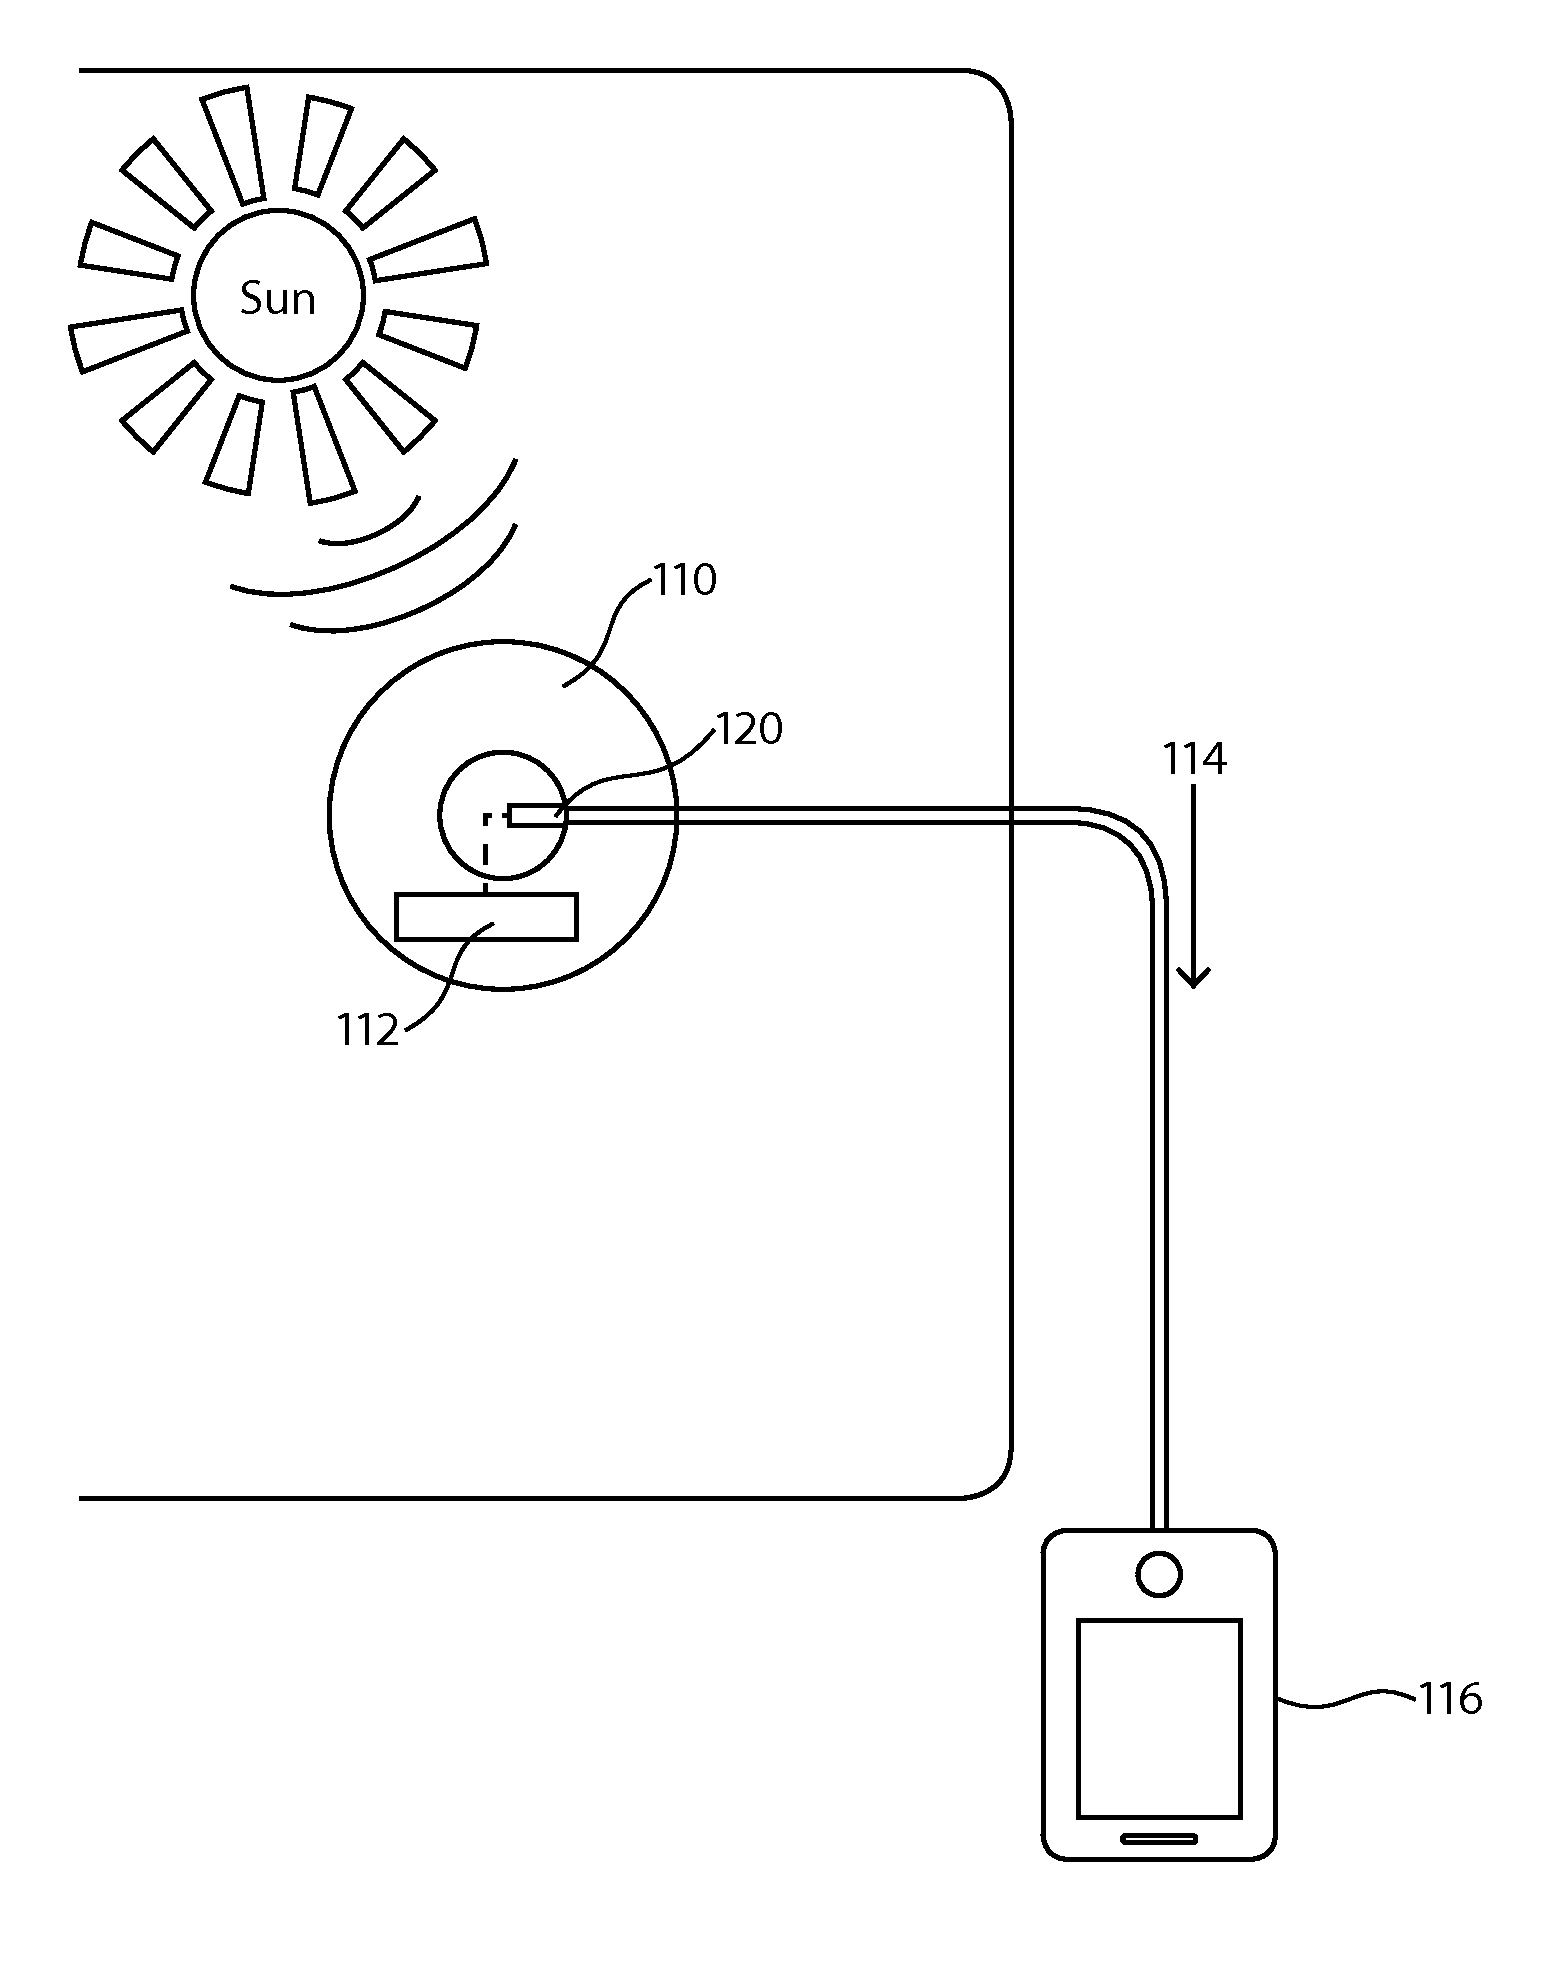 Apparatus, system and method for charging a mobile device